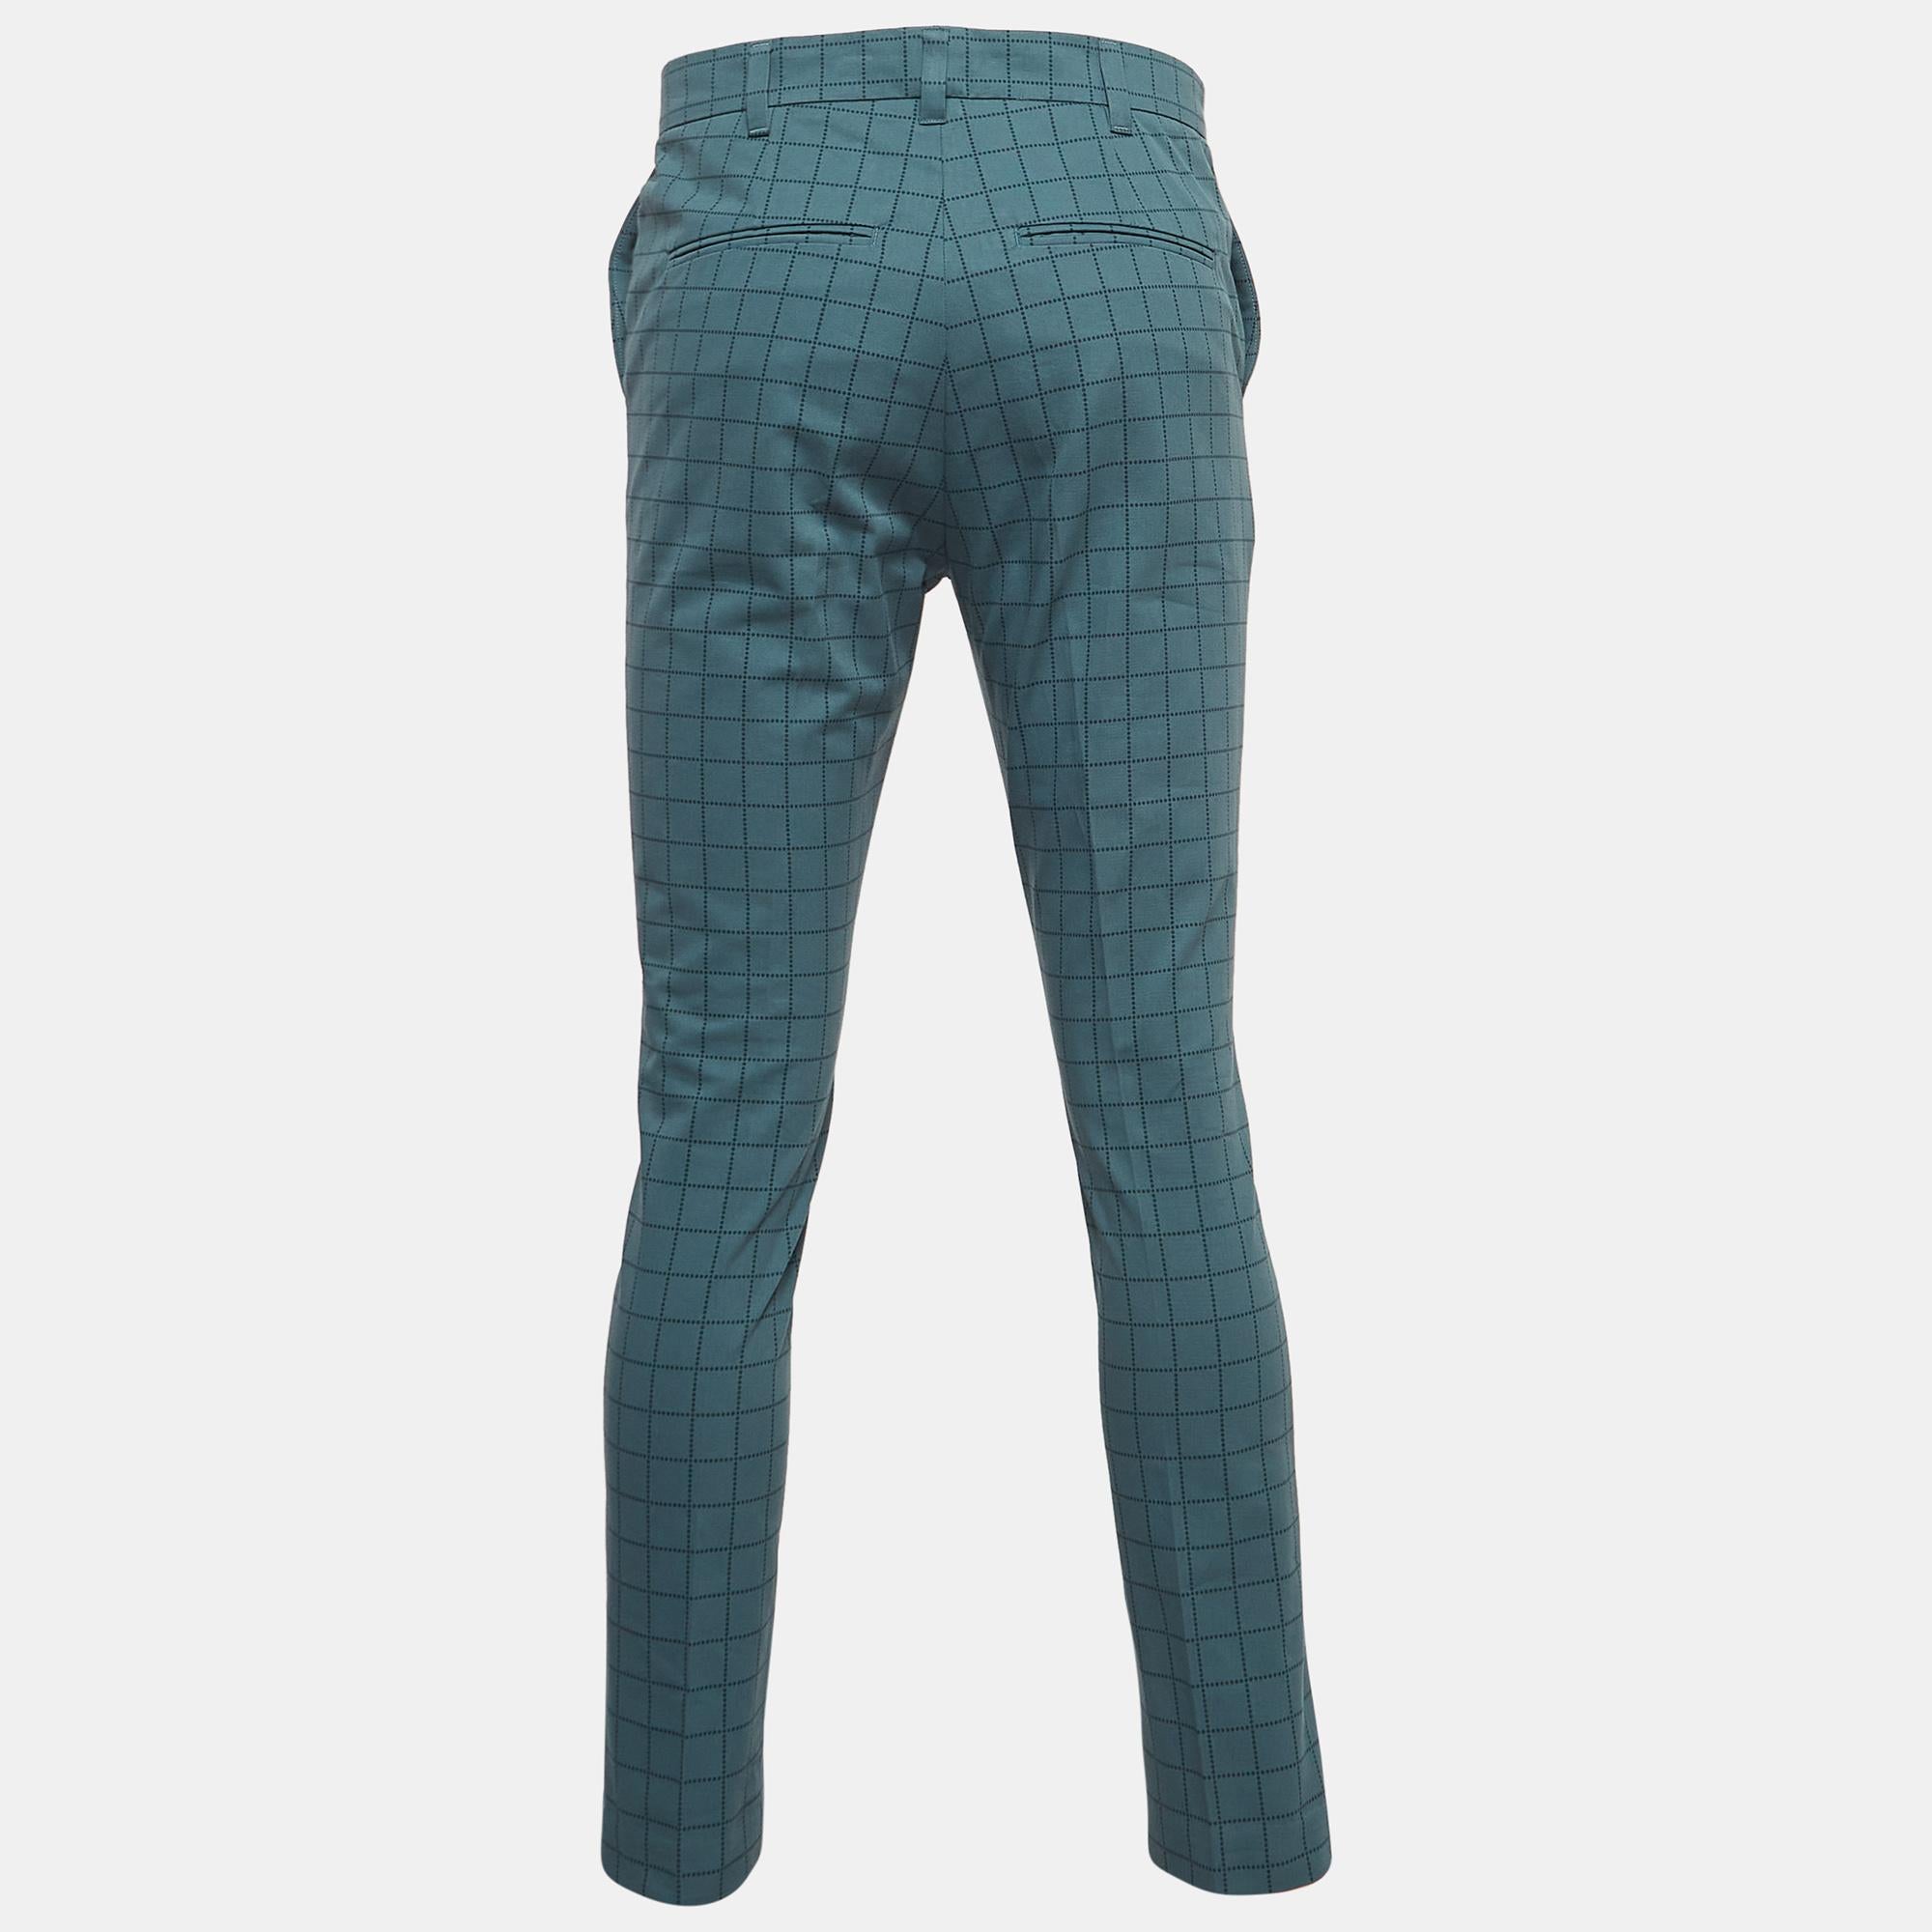 Enhance your formal attire with this pair of Bottega Veneta trousers. Designed into a superb silhouette and fit, this pair of trousers will definitely make you look elegant.

